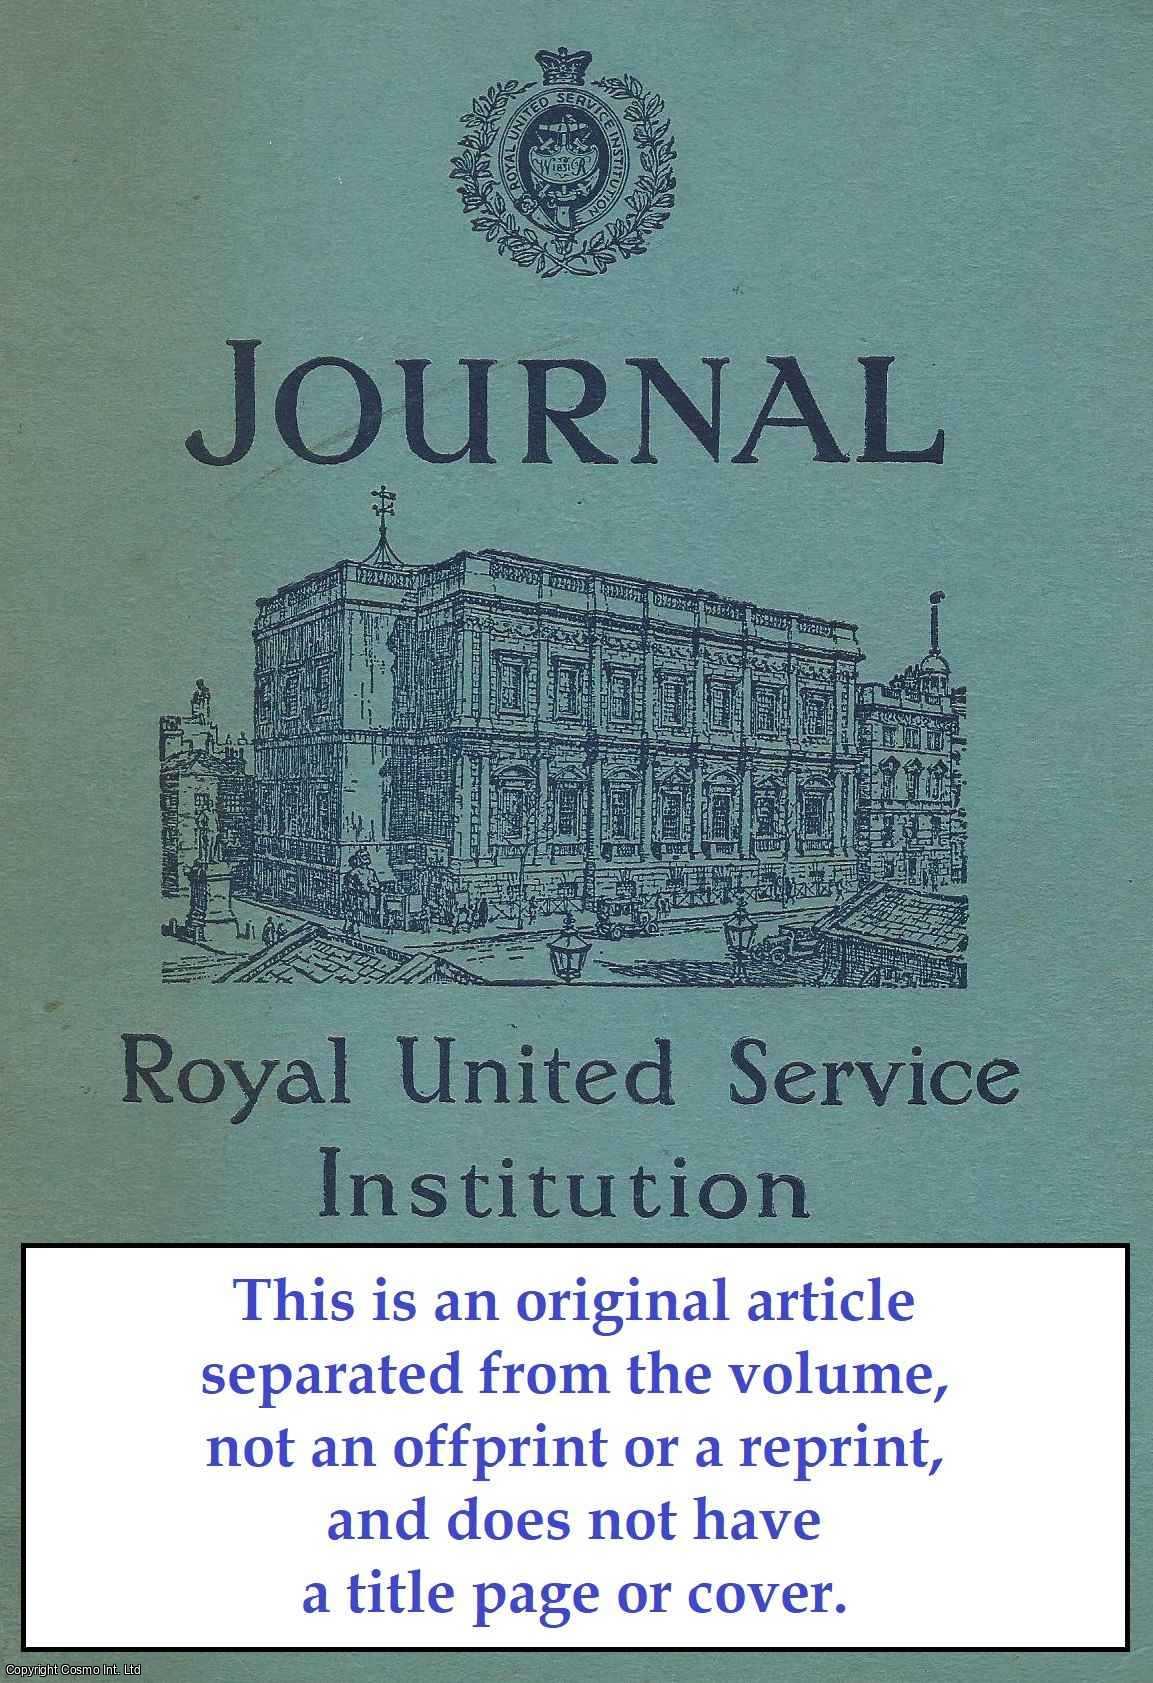 Geoffrey Baker - The U.K. Strategic Reserve. An original article from The Royal United Service Institution Journal, 1968.